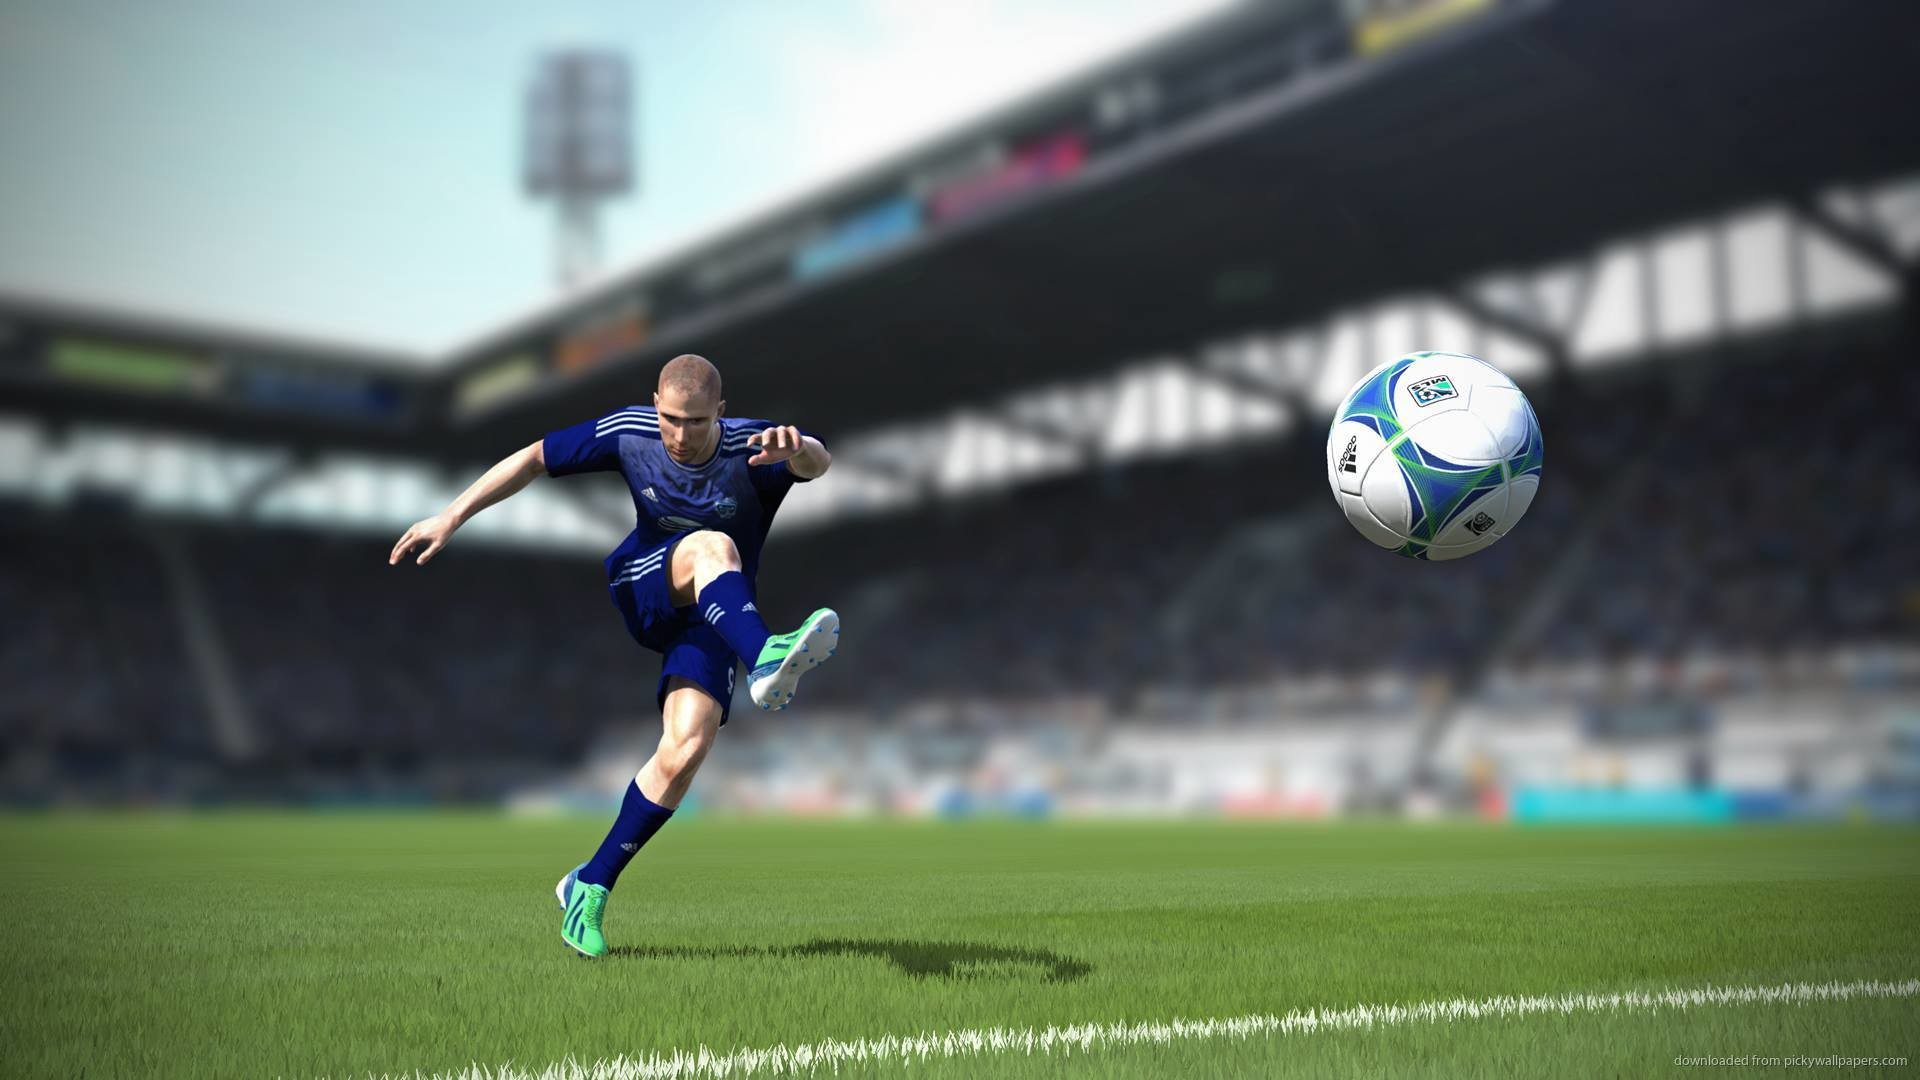 1920x1080 FIFA 14 Game Wallpaper for 